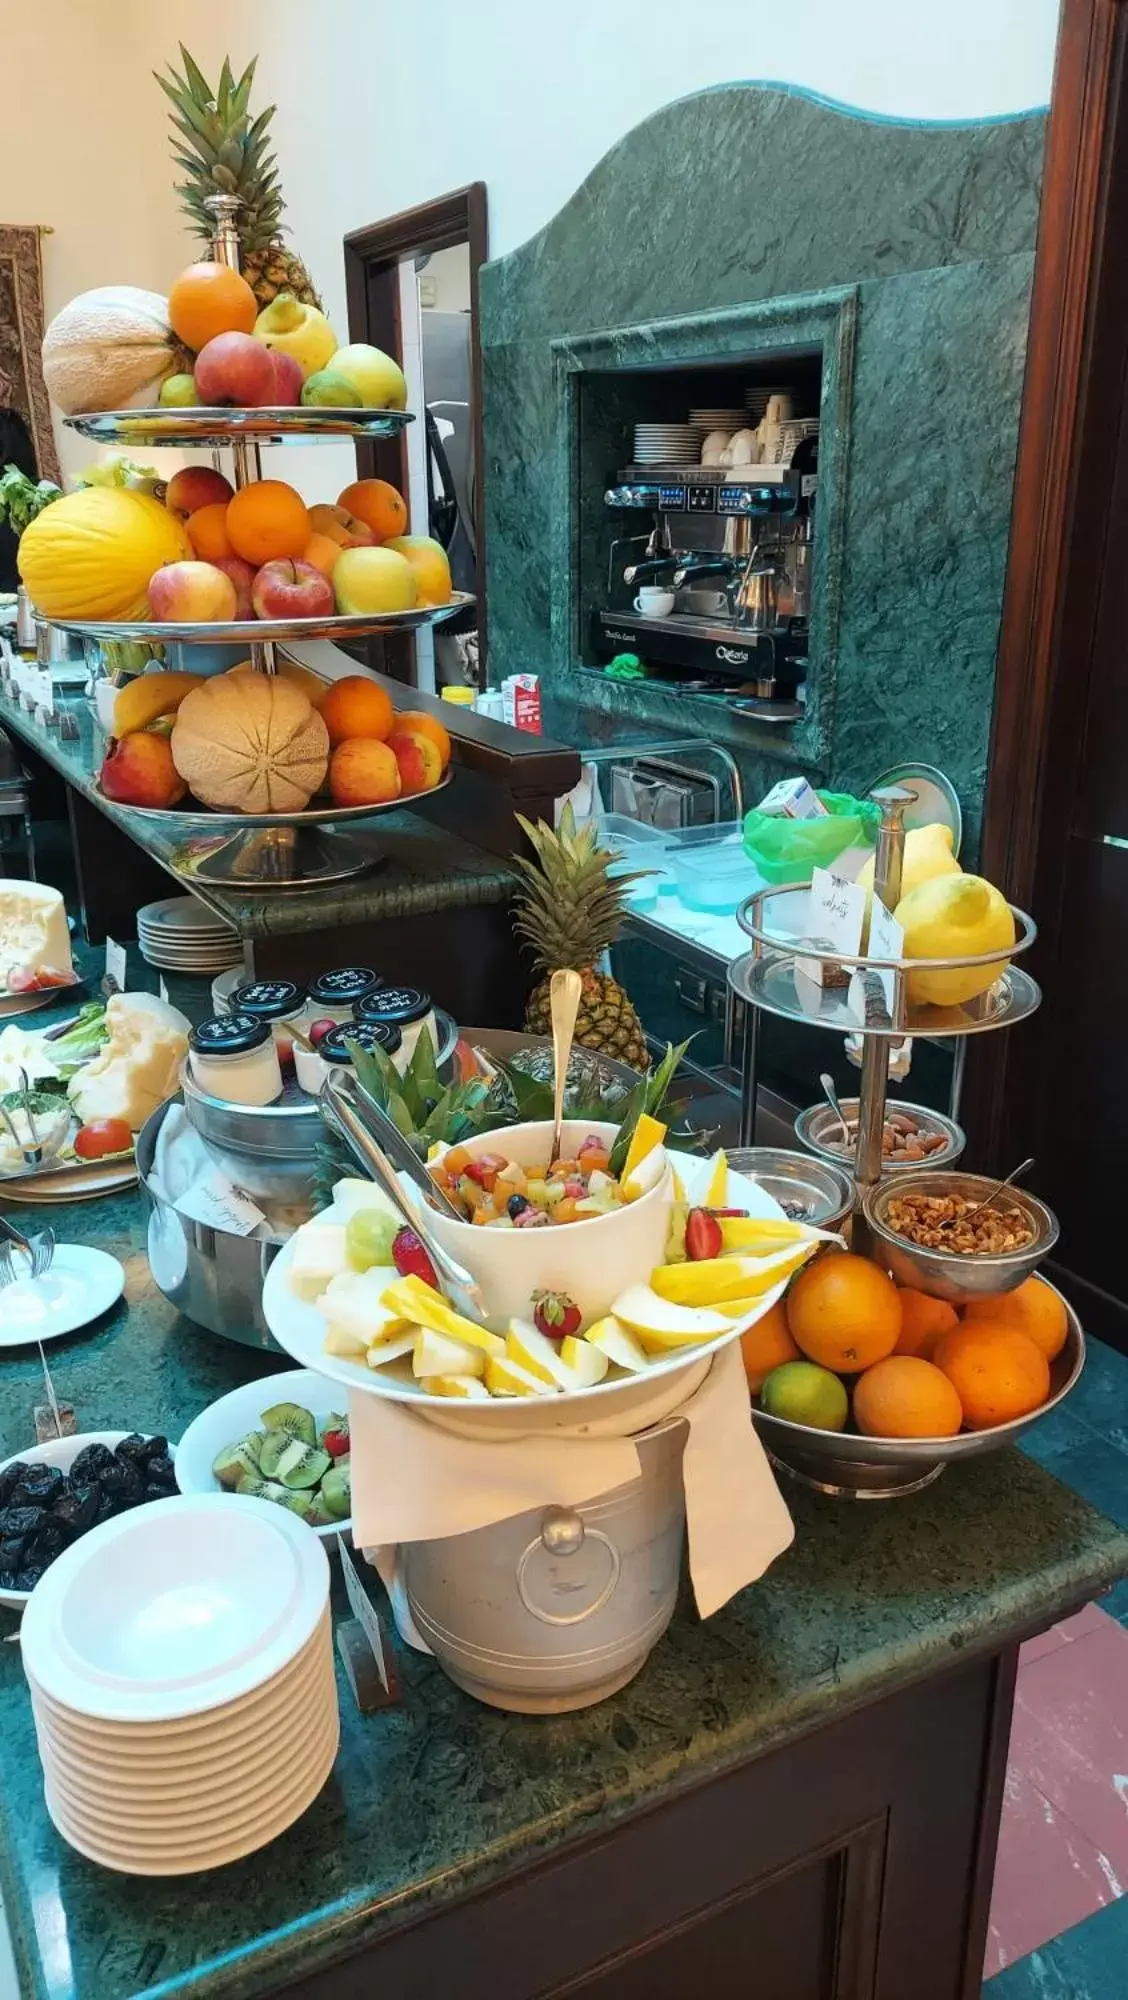 Breakfast in Hotel Diocleziano